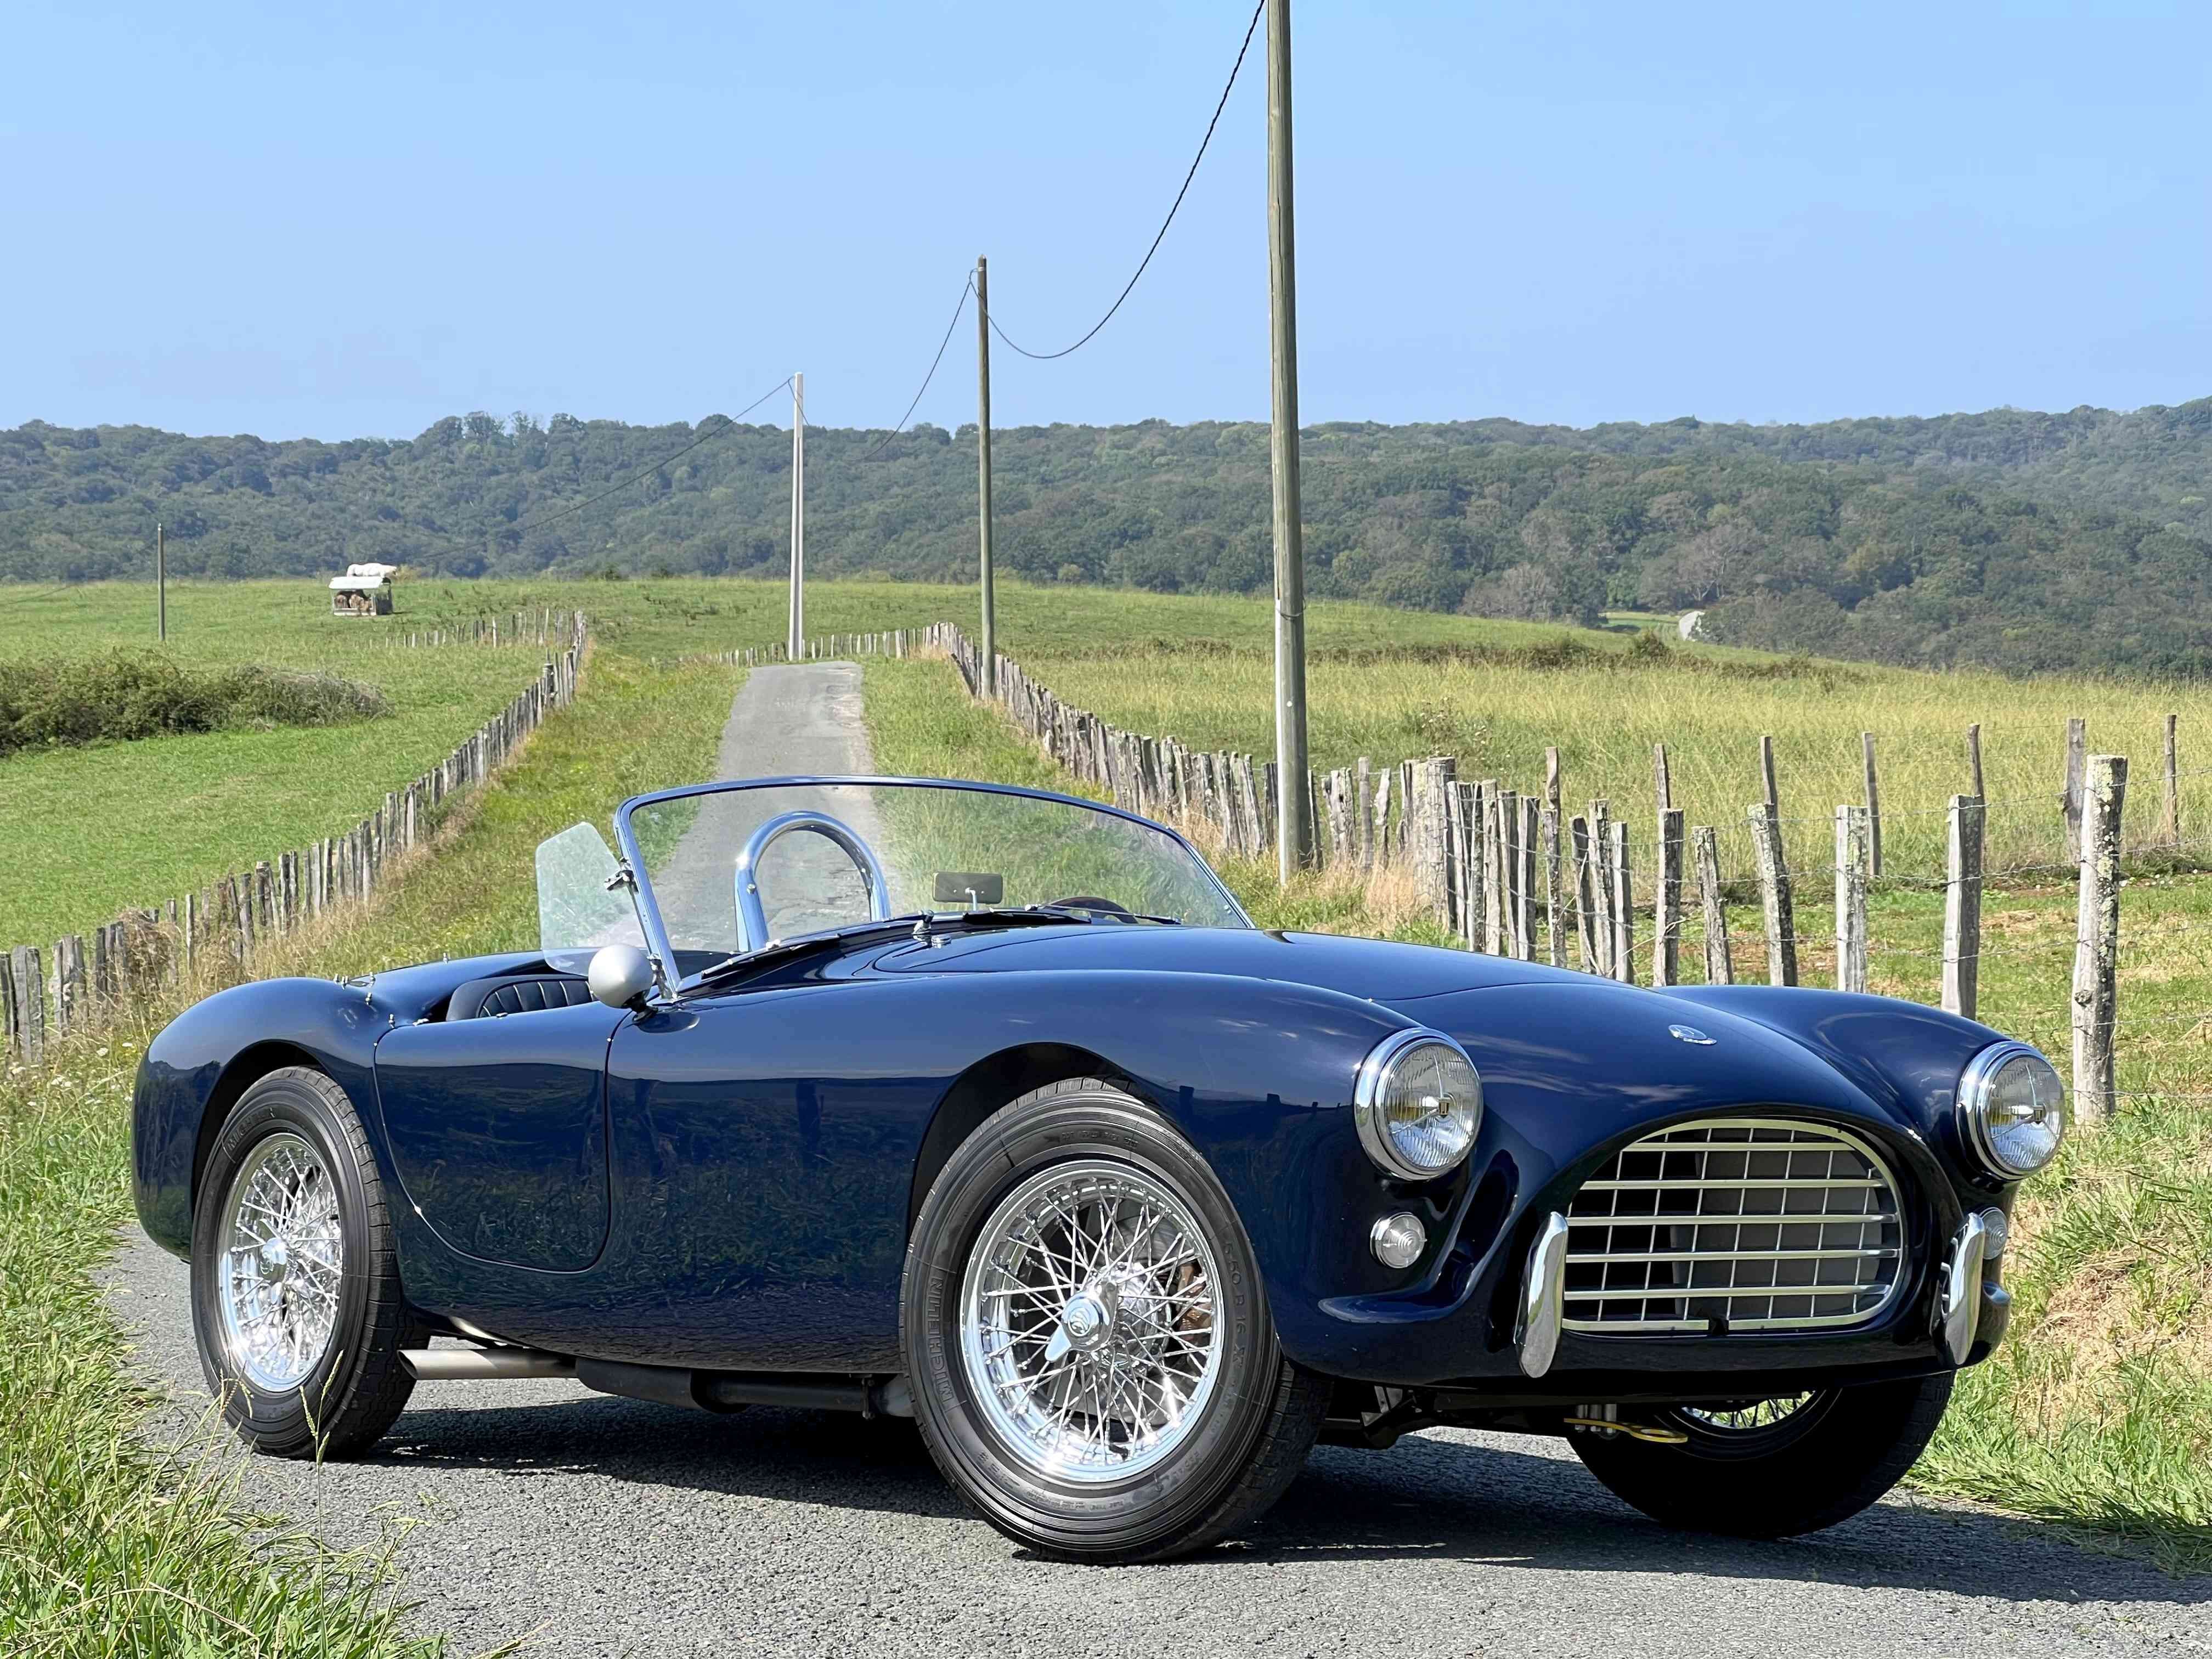 AC Ace Convertible in Blue used in Biarritz for € 395,000.-